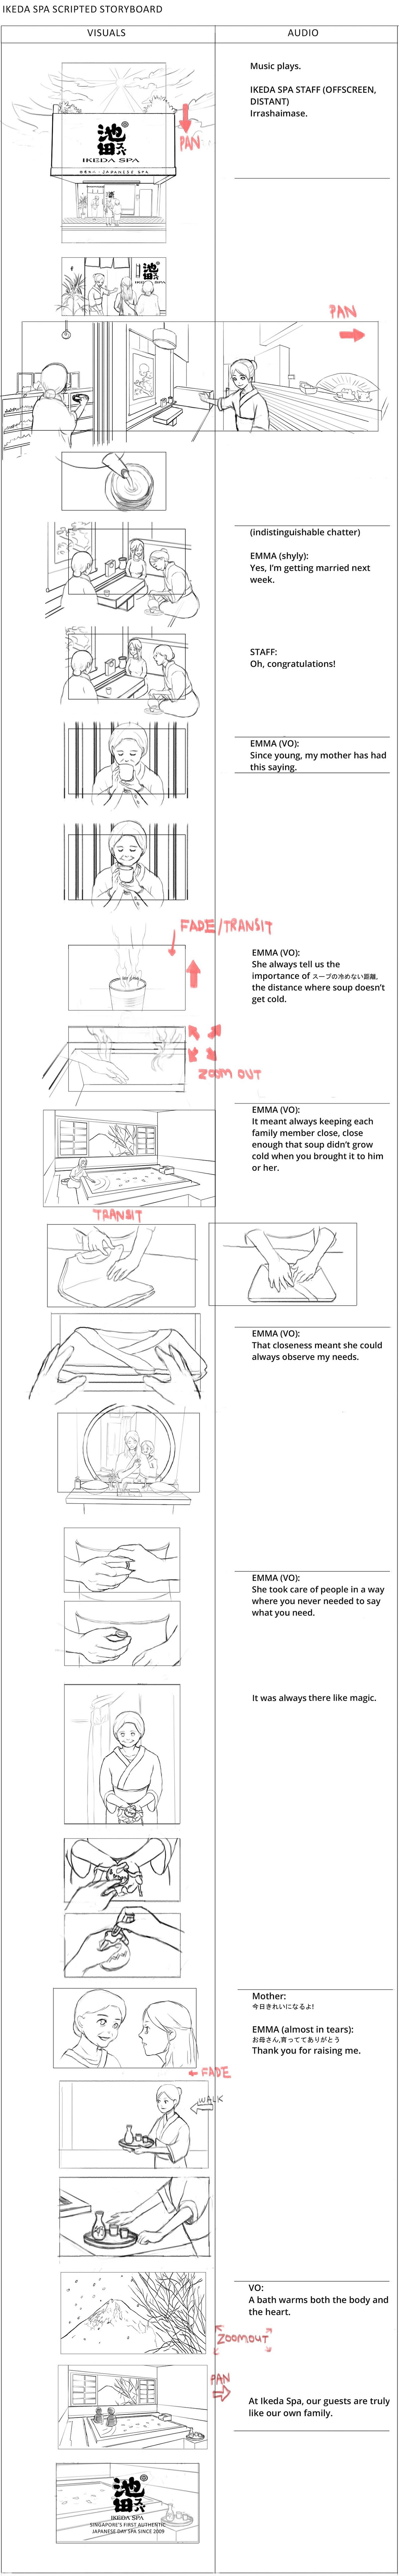 japanese spa commercial advertisement storyboarding   anime